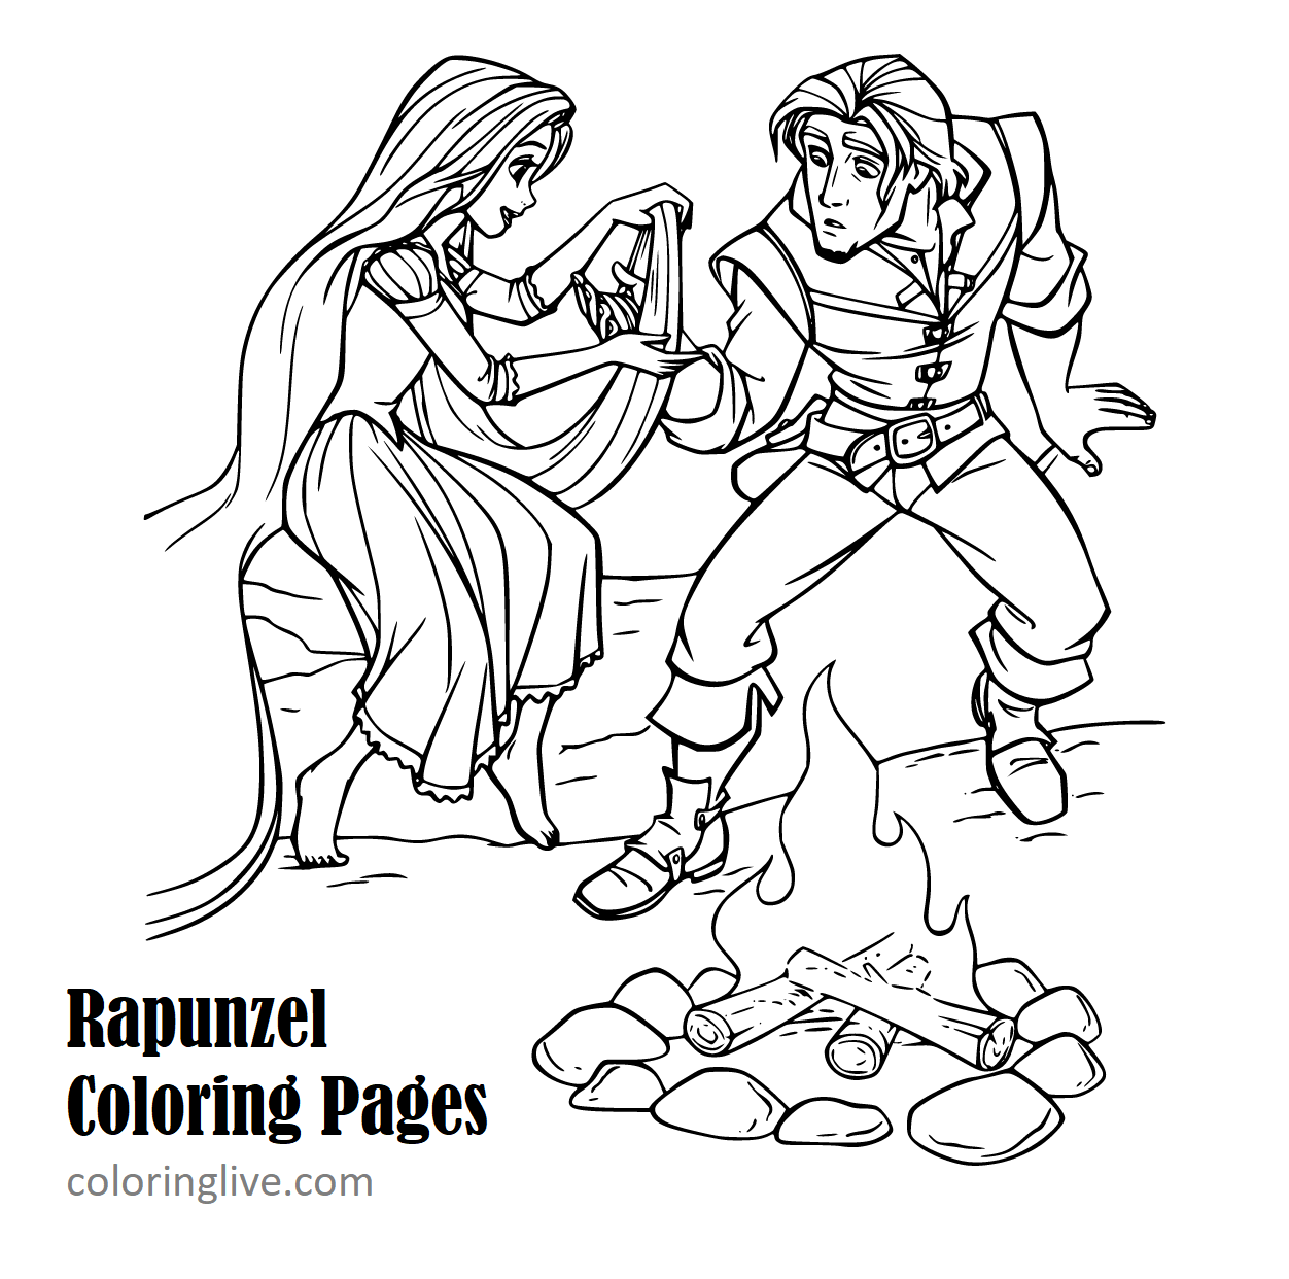 Printable Tangled: Rapunzel and Flynn Coloring Page for kids.